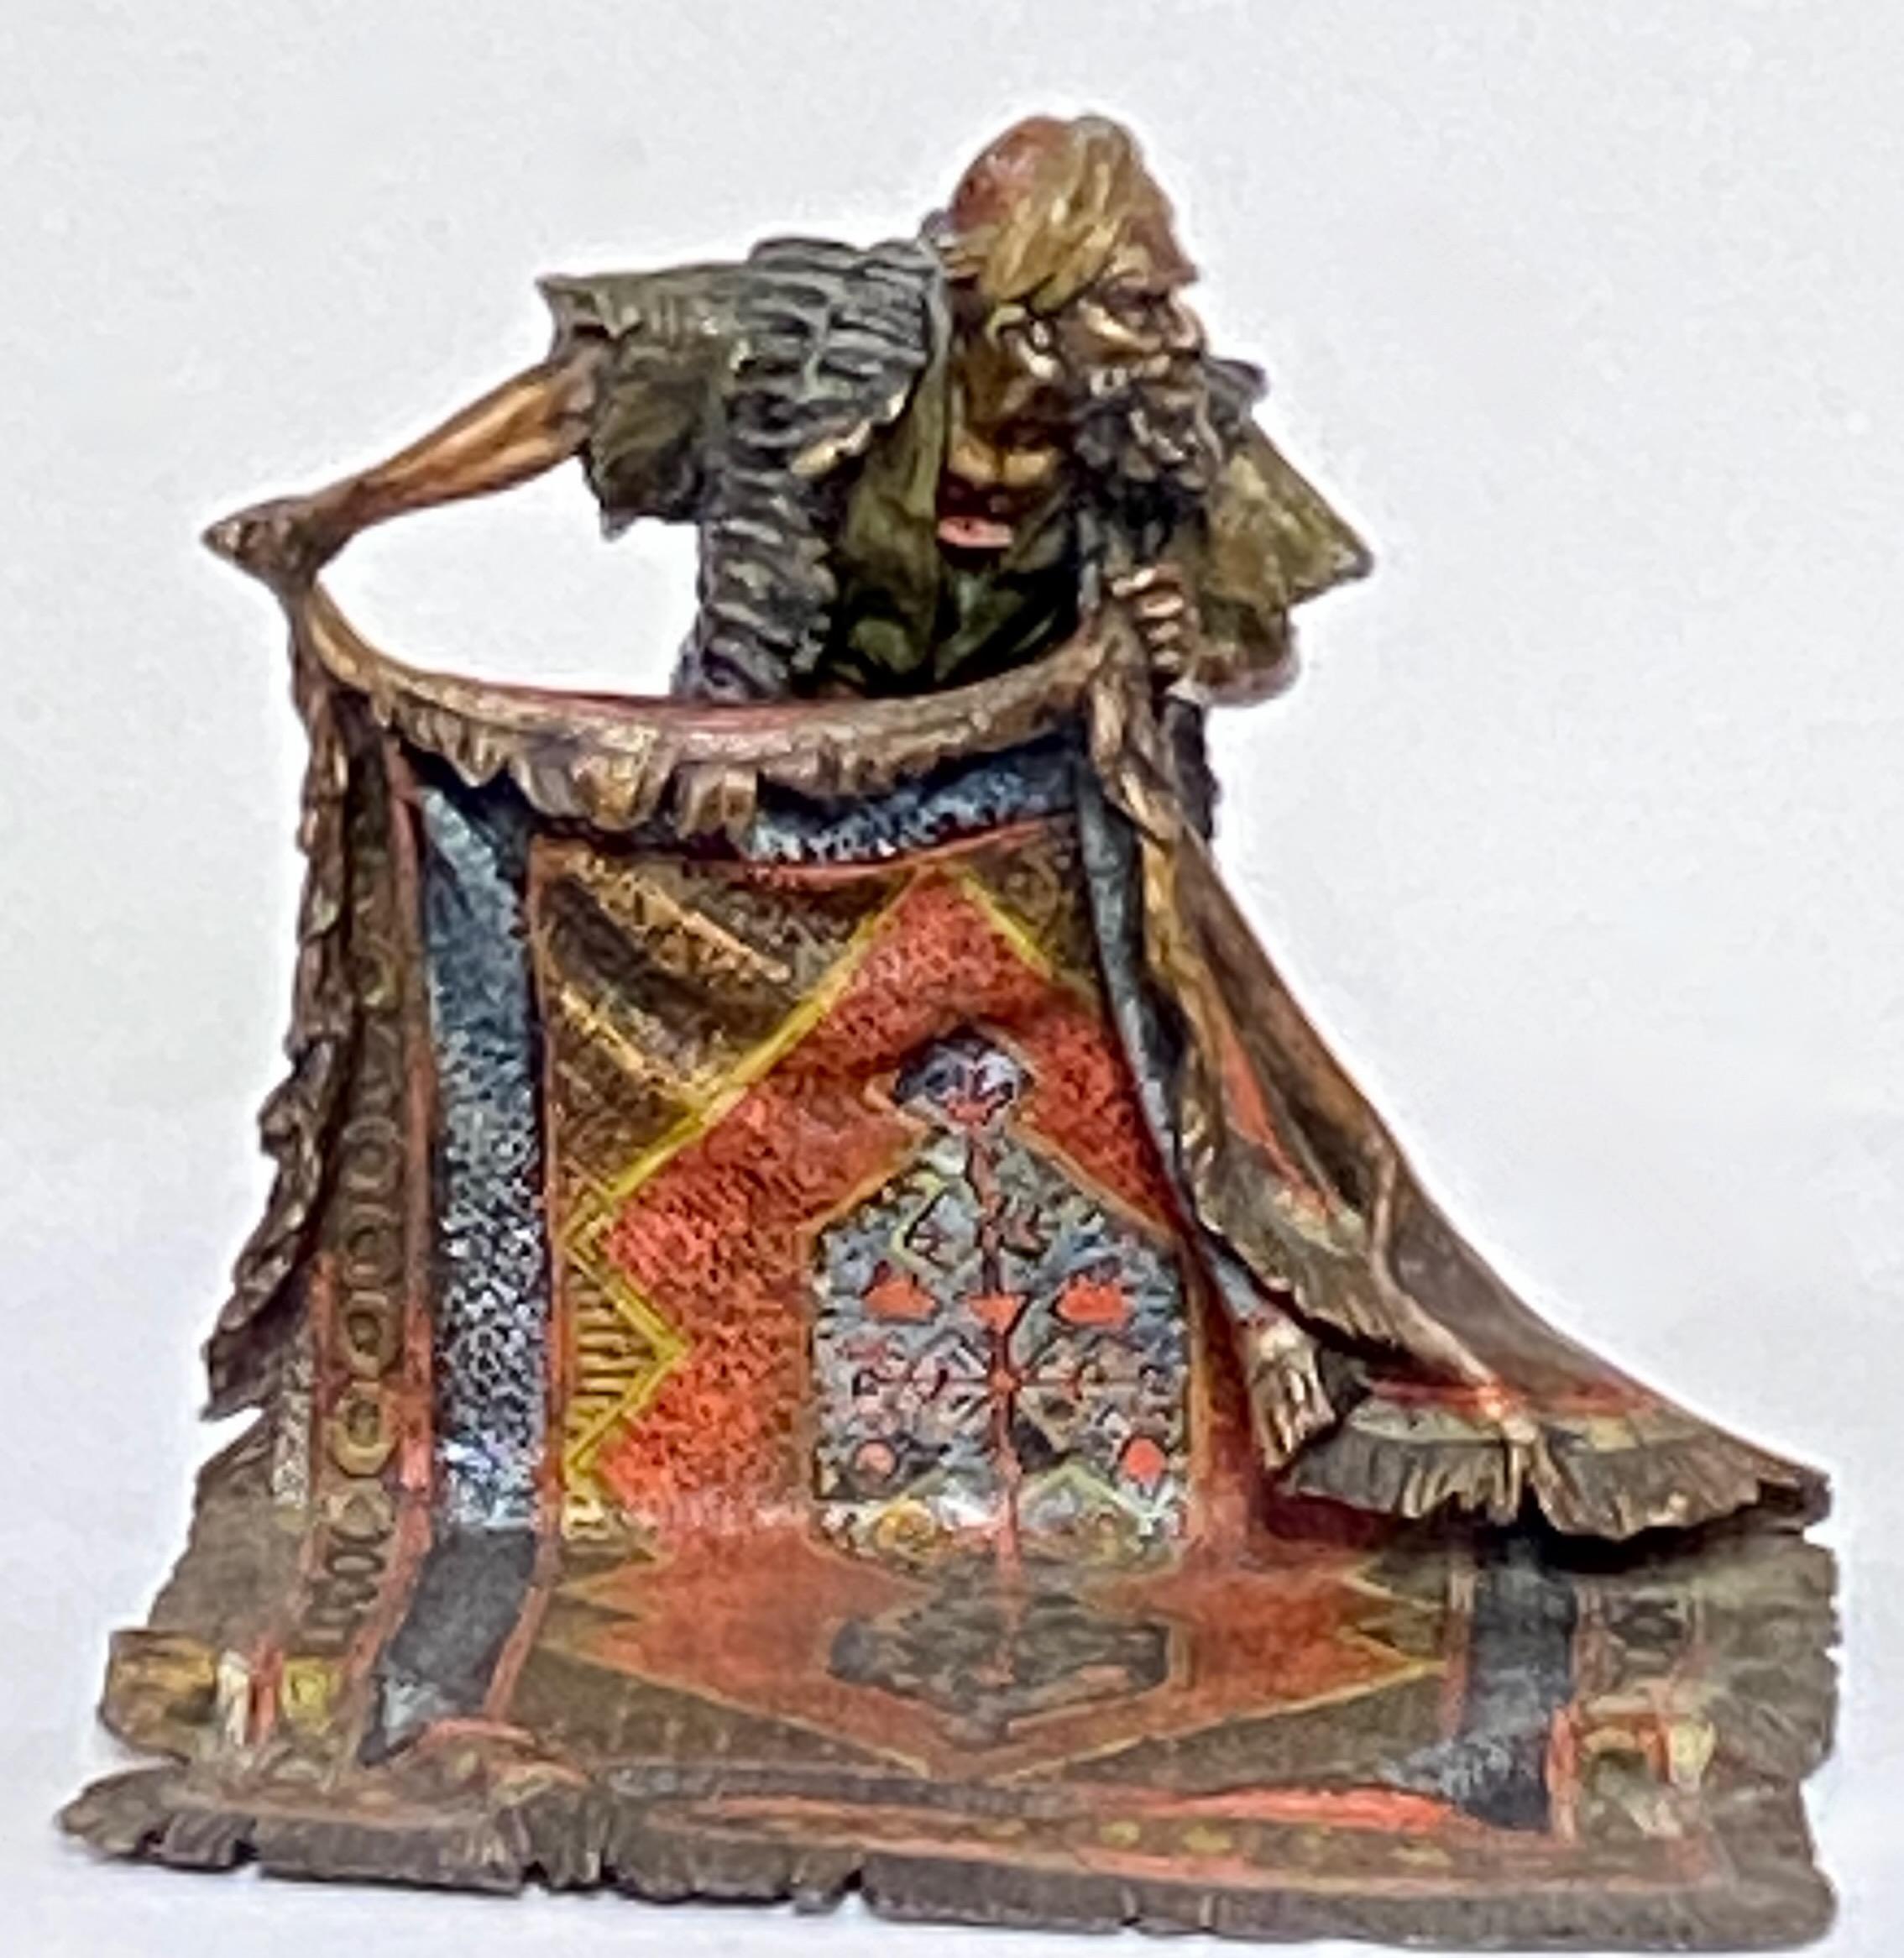  This exceptional large Orientalist style bronze is marked Bergman, one of early twentieth-century Vienna’s most famed producers. Crafted from cold-painted bronze, and depicts a rug merchant displaying his wares. The rug is richly detailed and the